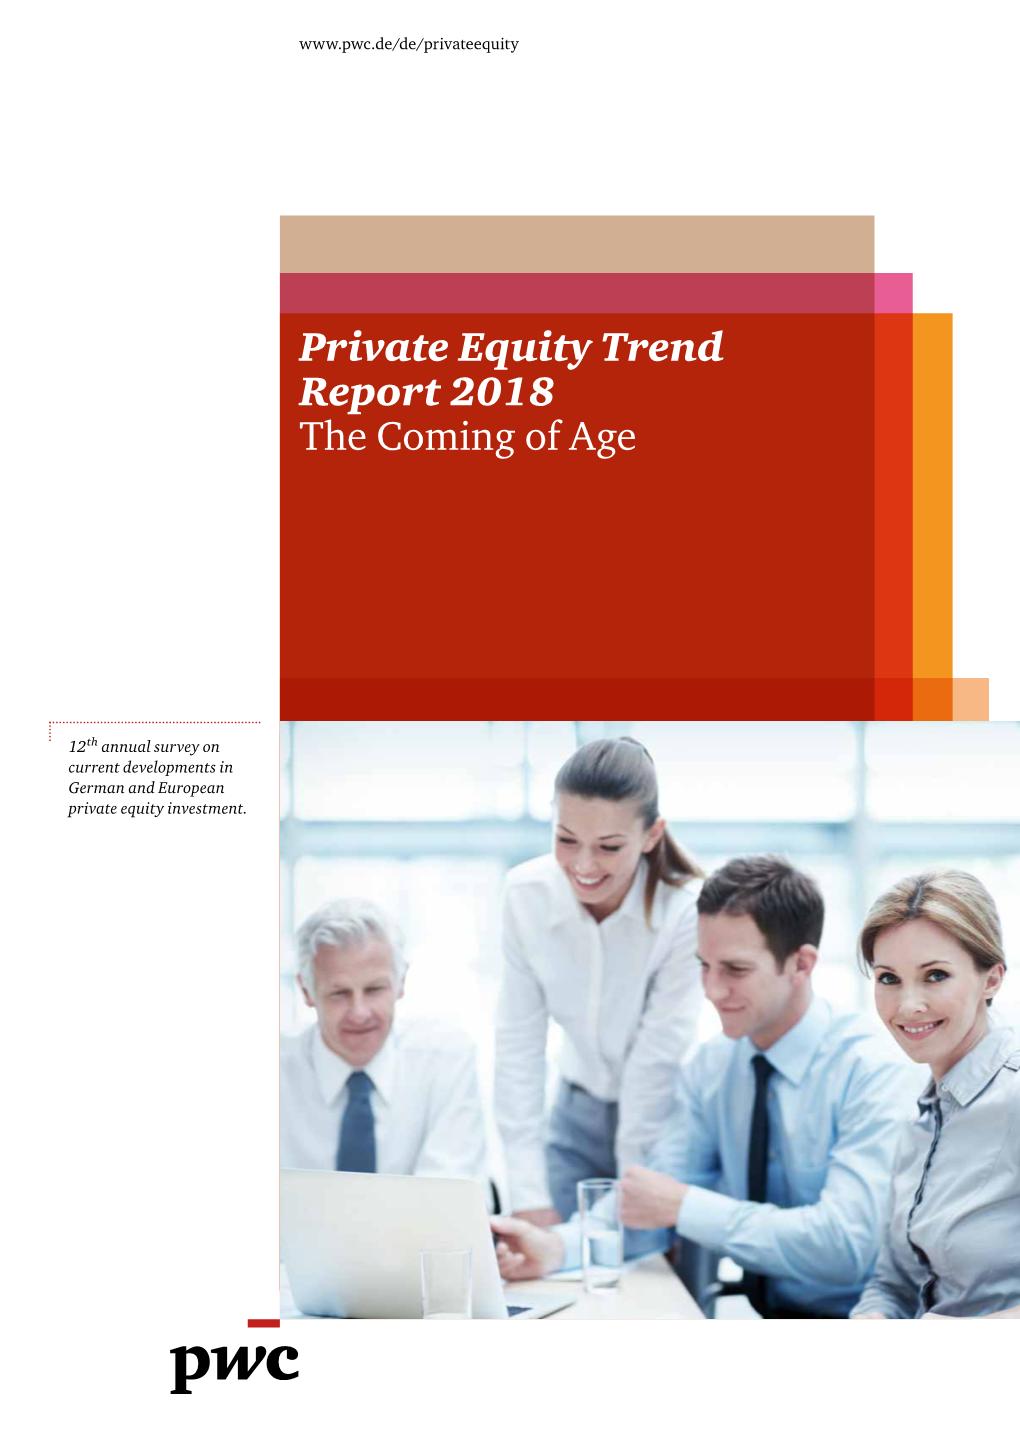 Private Equity Trend Report 2018 the Coming of Age